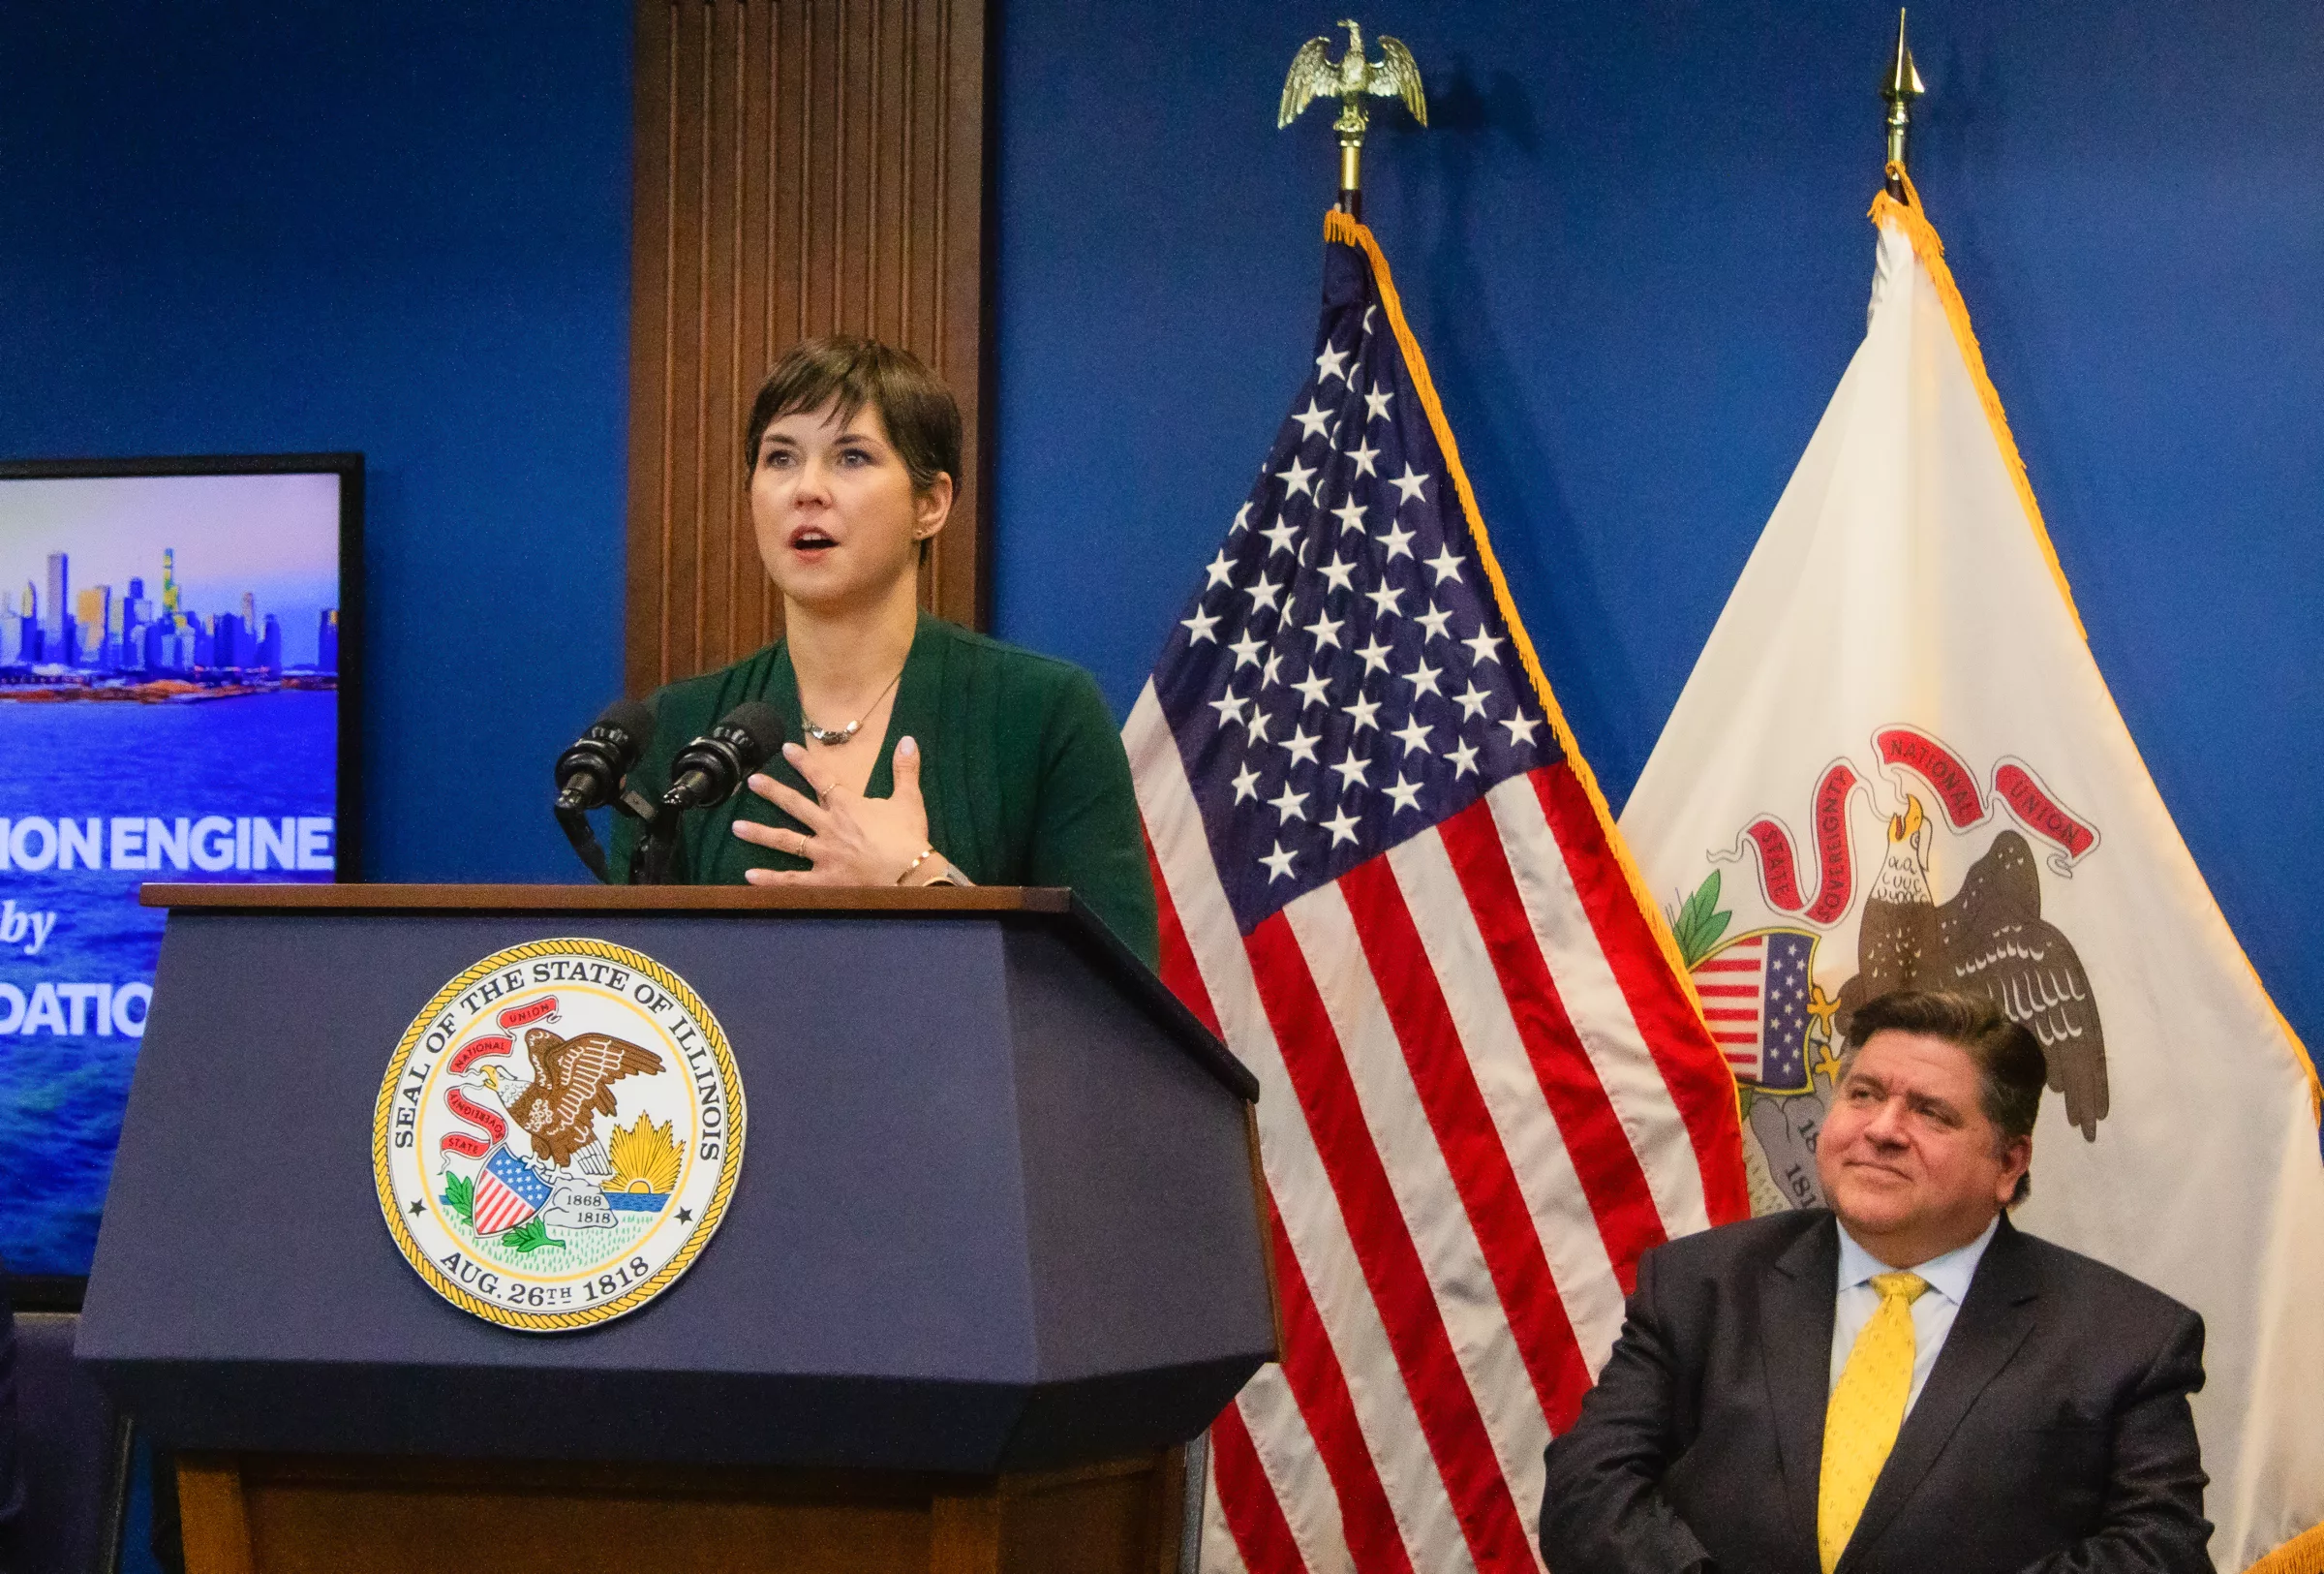 Alaina Harkness, the executive director of the water tech nonprofit Current, appears at a Chicago news conference on Tuesday with Gov. JB Pritzker. Current will receive about $15 million over two years from the National Science Foundation, with up to $160 million over 10 years. (Capitol News Illinois photo by Dilpreet Raju)